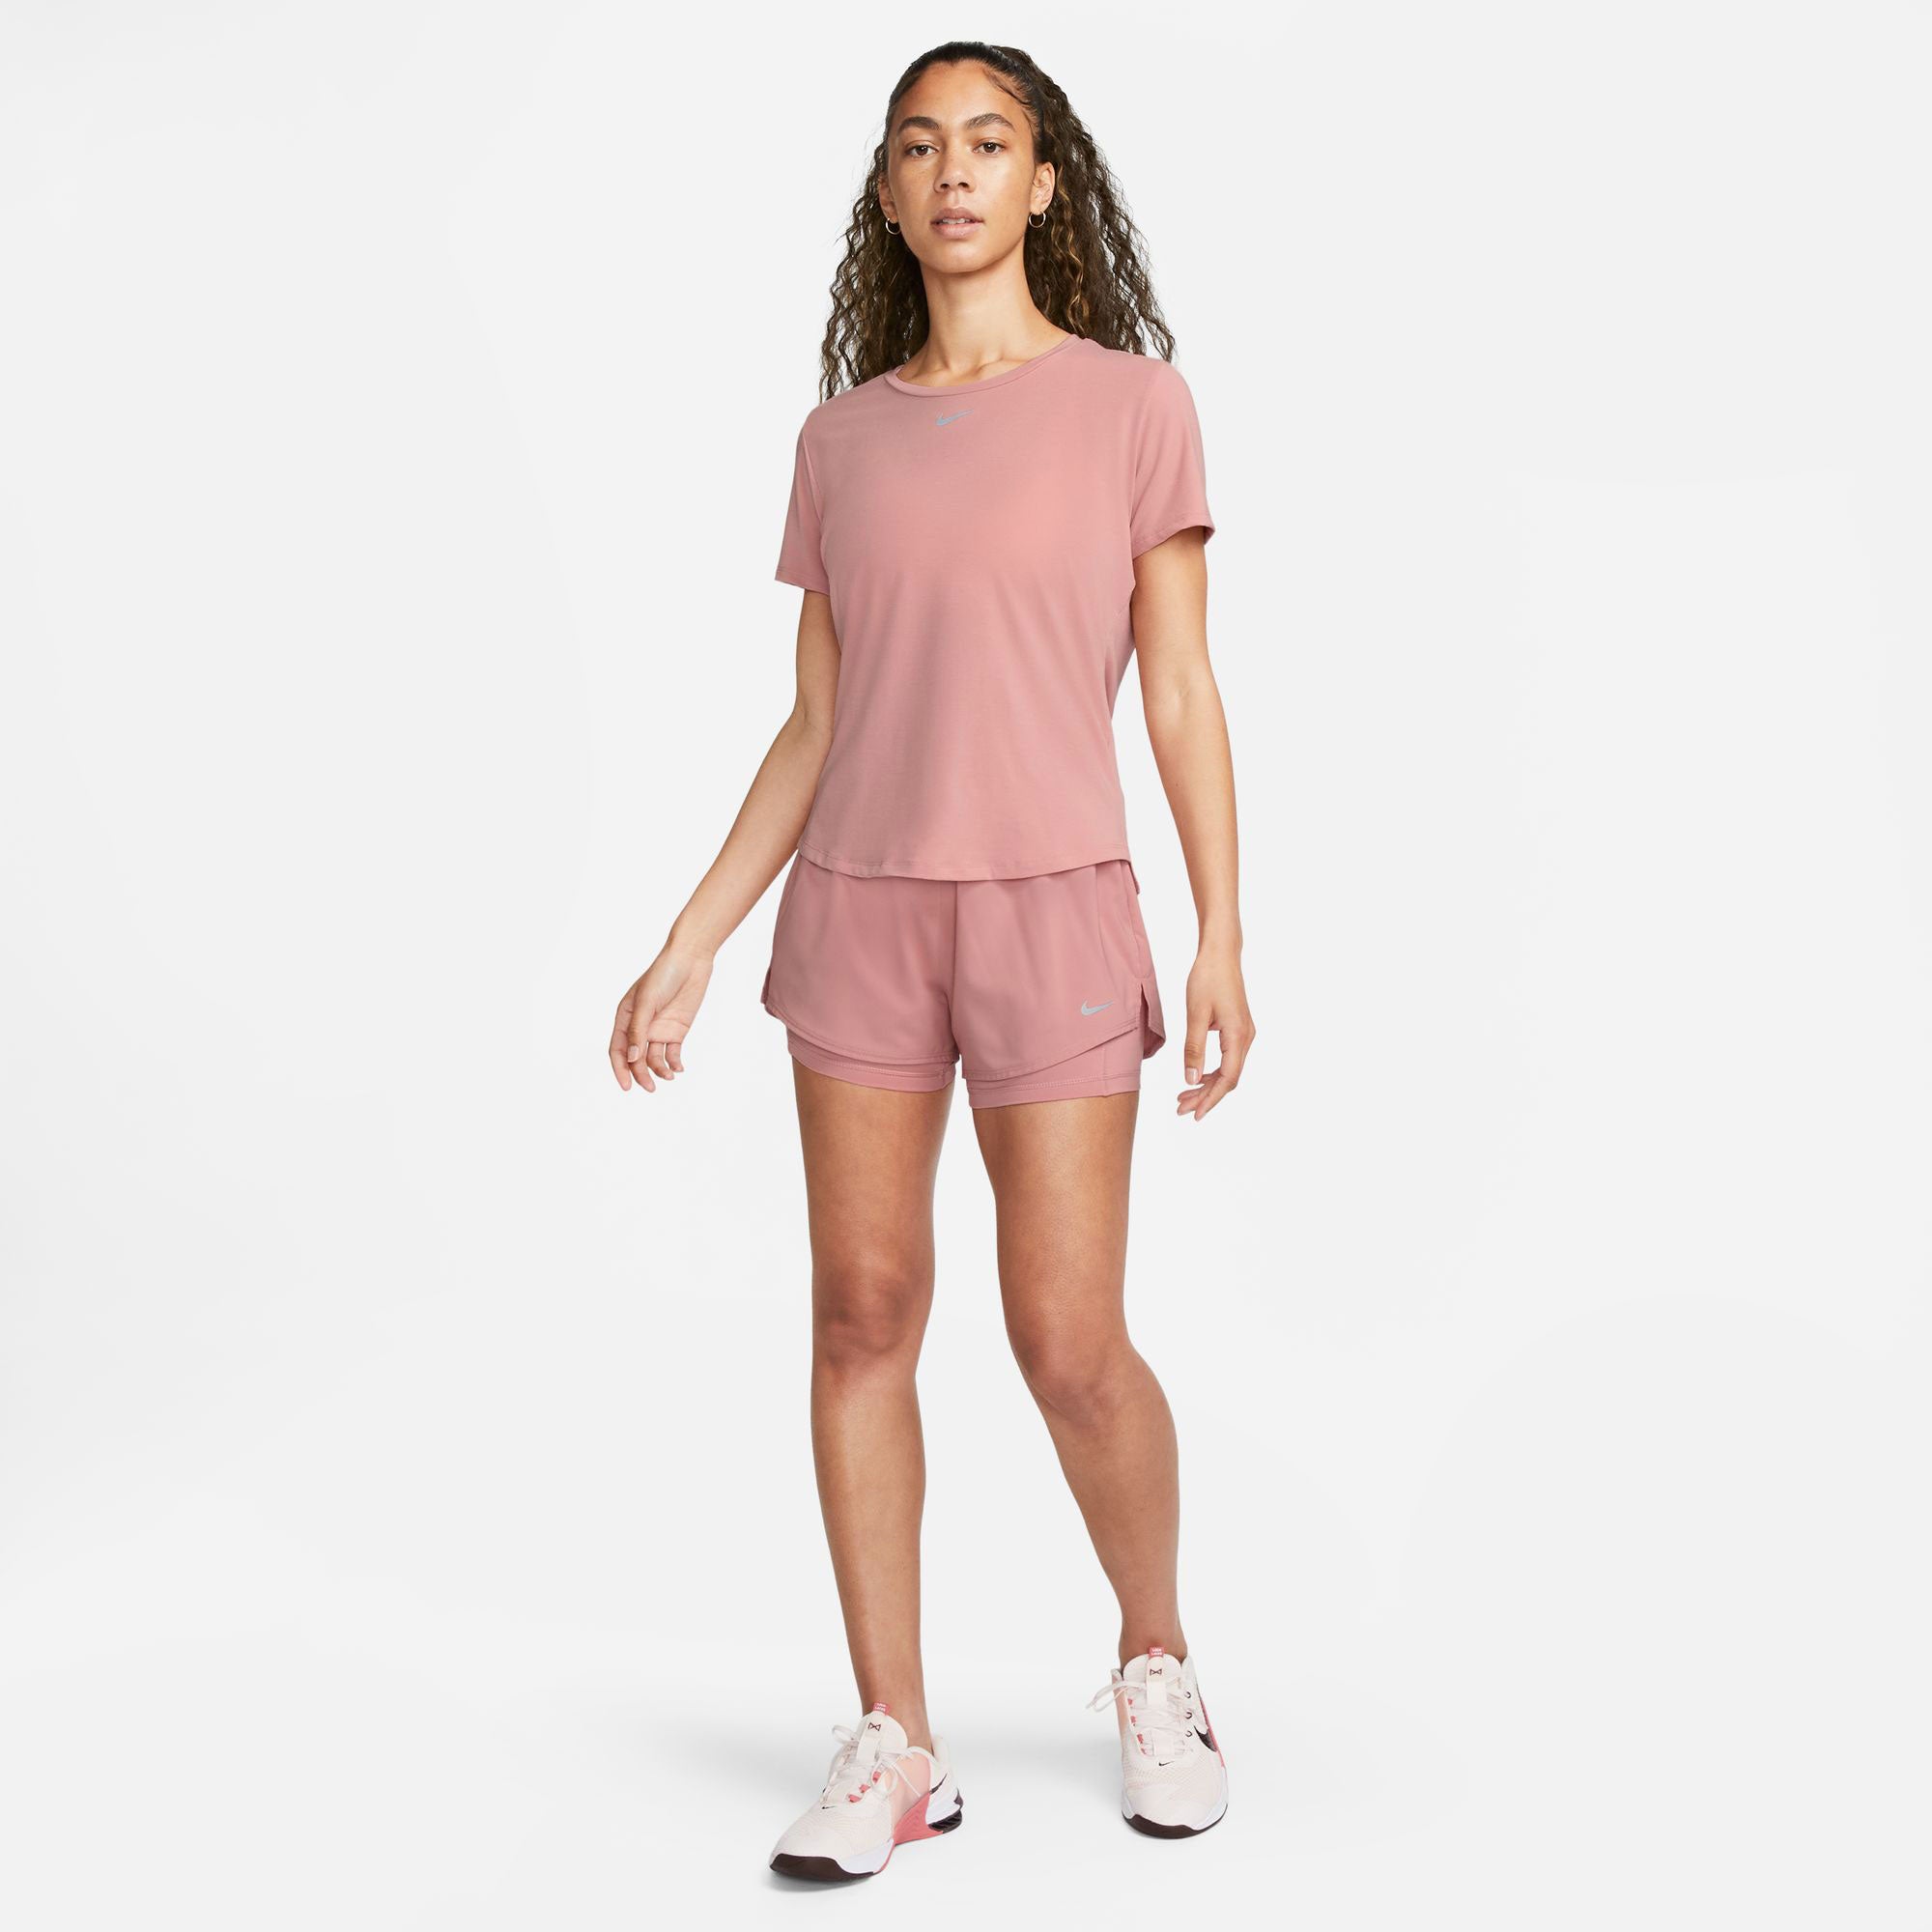 Nike One Luxe Dri-FIT Women's Standard Fit Shirt Pink (5)